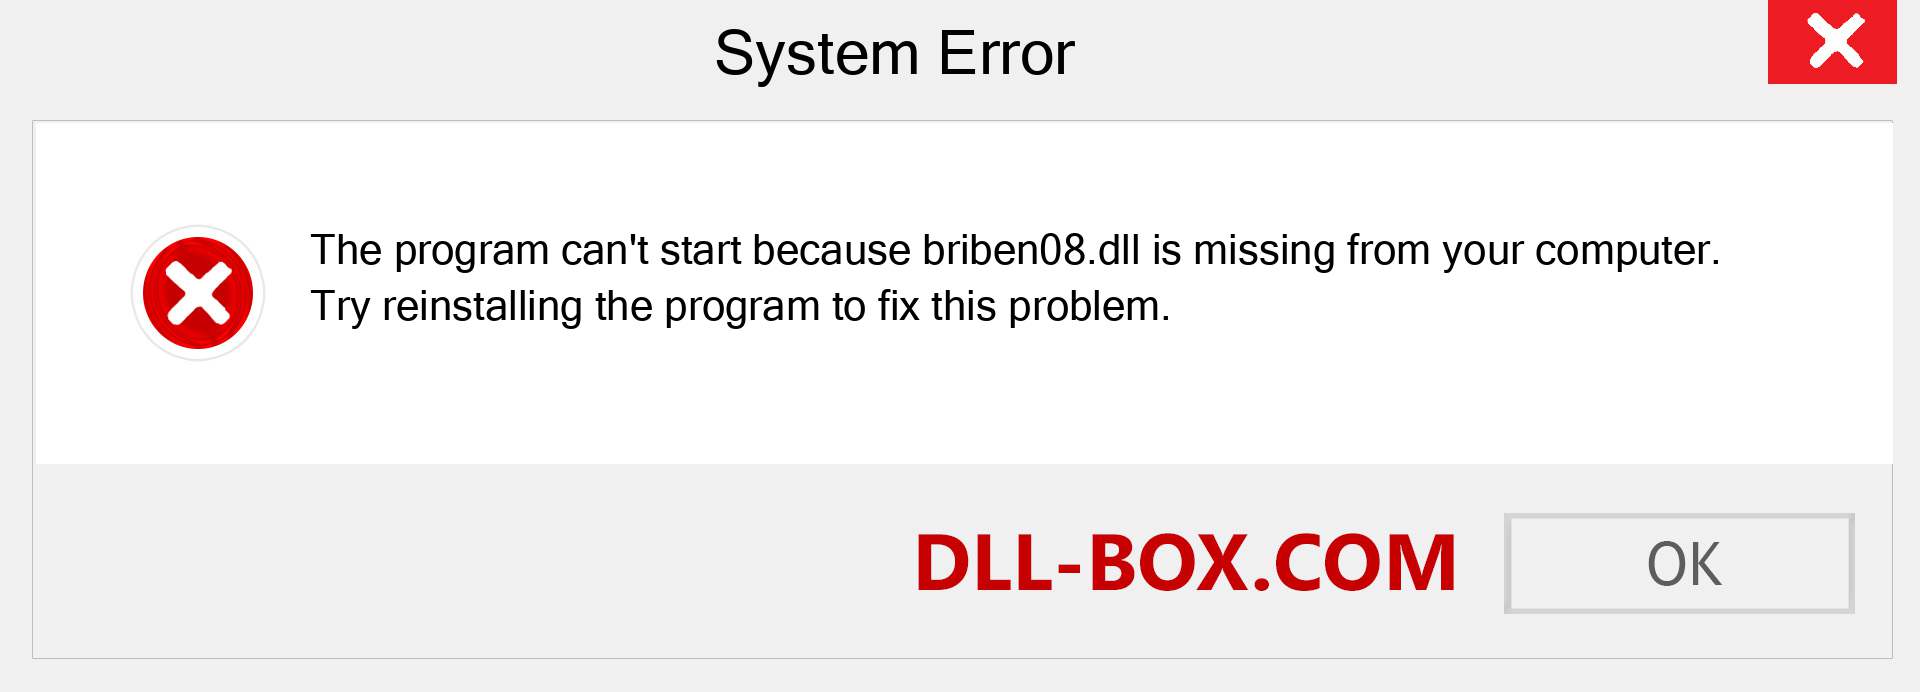  briben08.dll file is missing?. Download for Windows 7, 8, 10 - Fix  briben08 dll Missing Error on Windows, photos, images